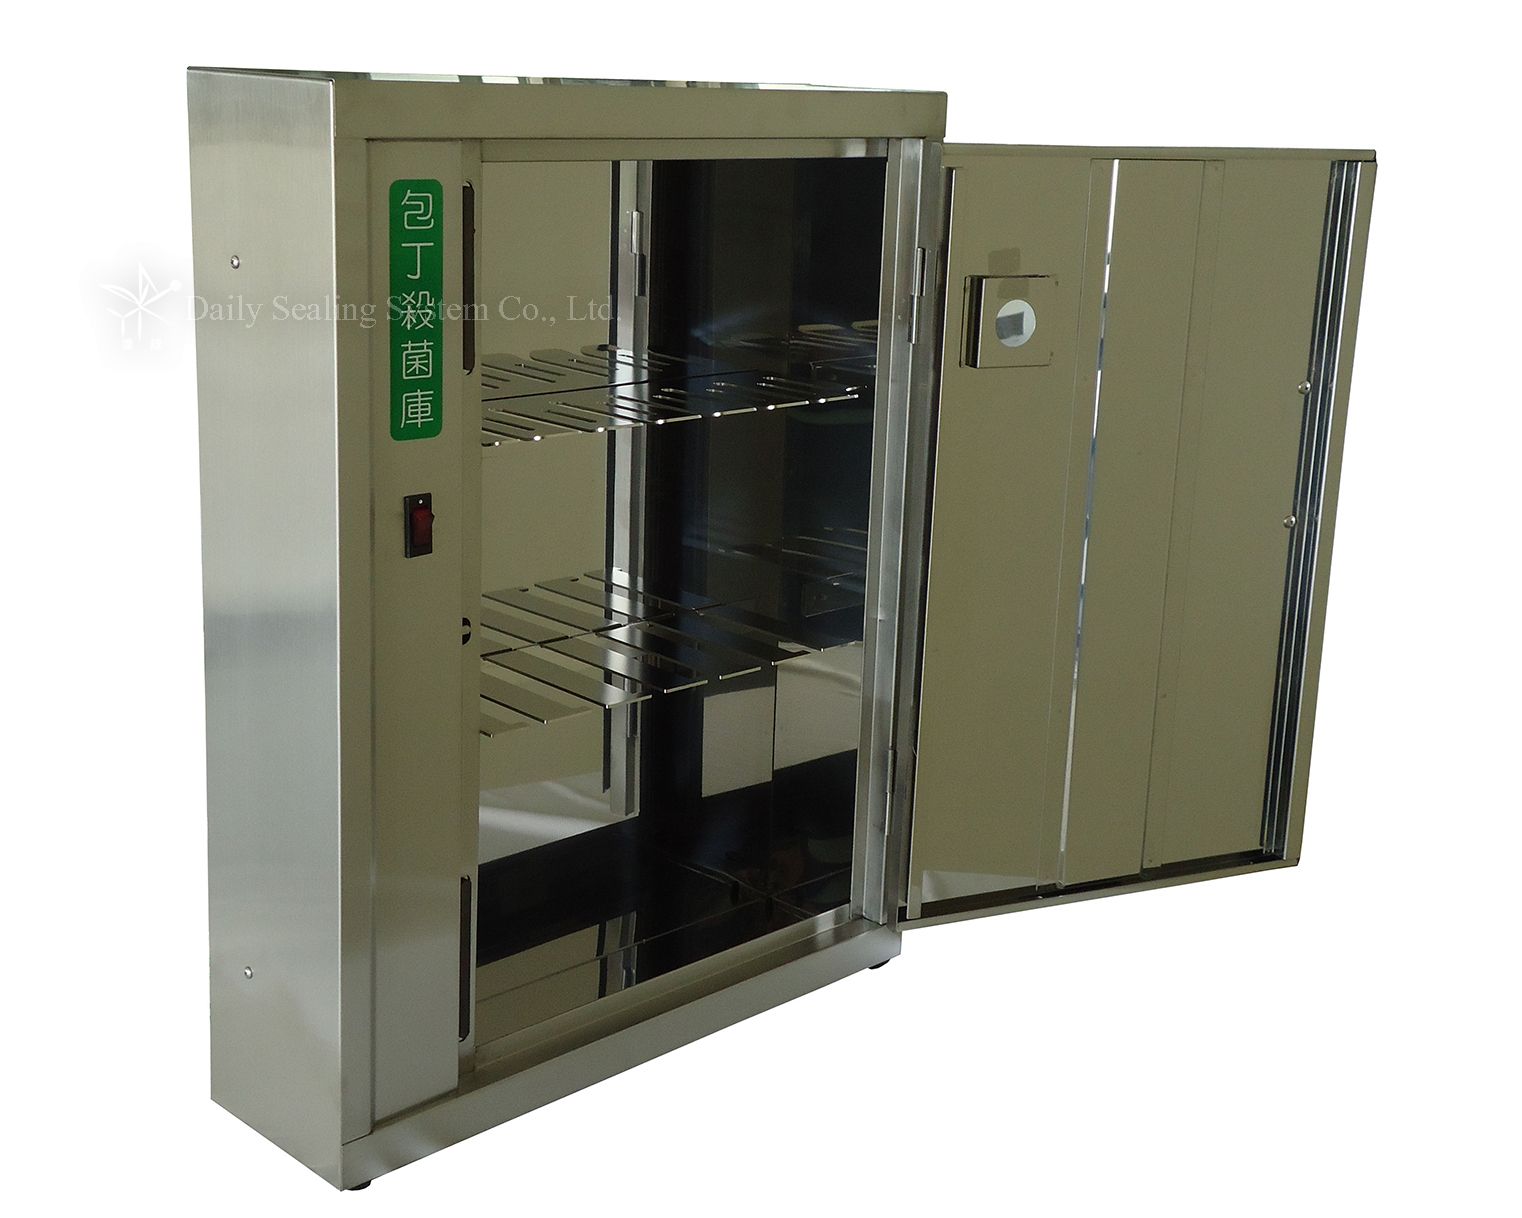 DS-C10A Ultraviolet Lamp Cabinet for Knives